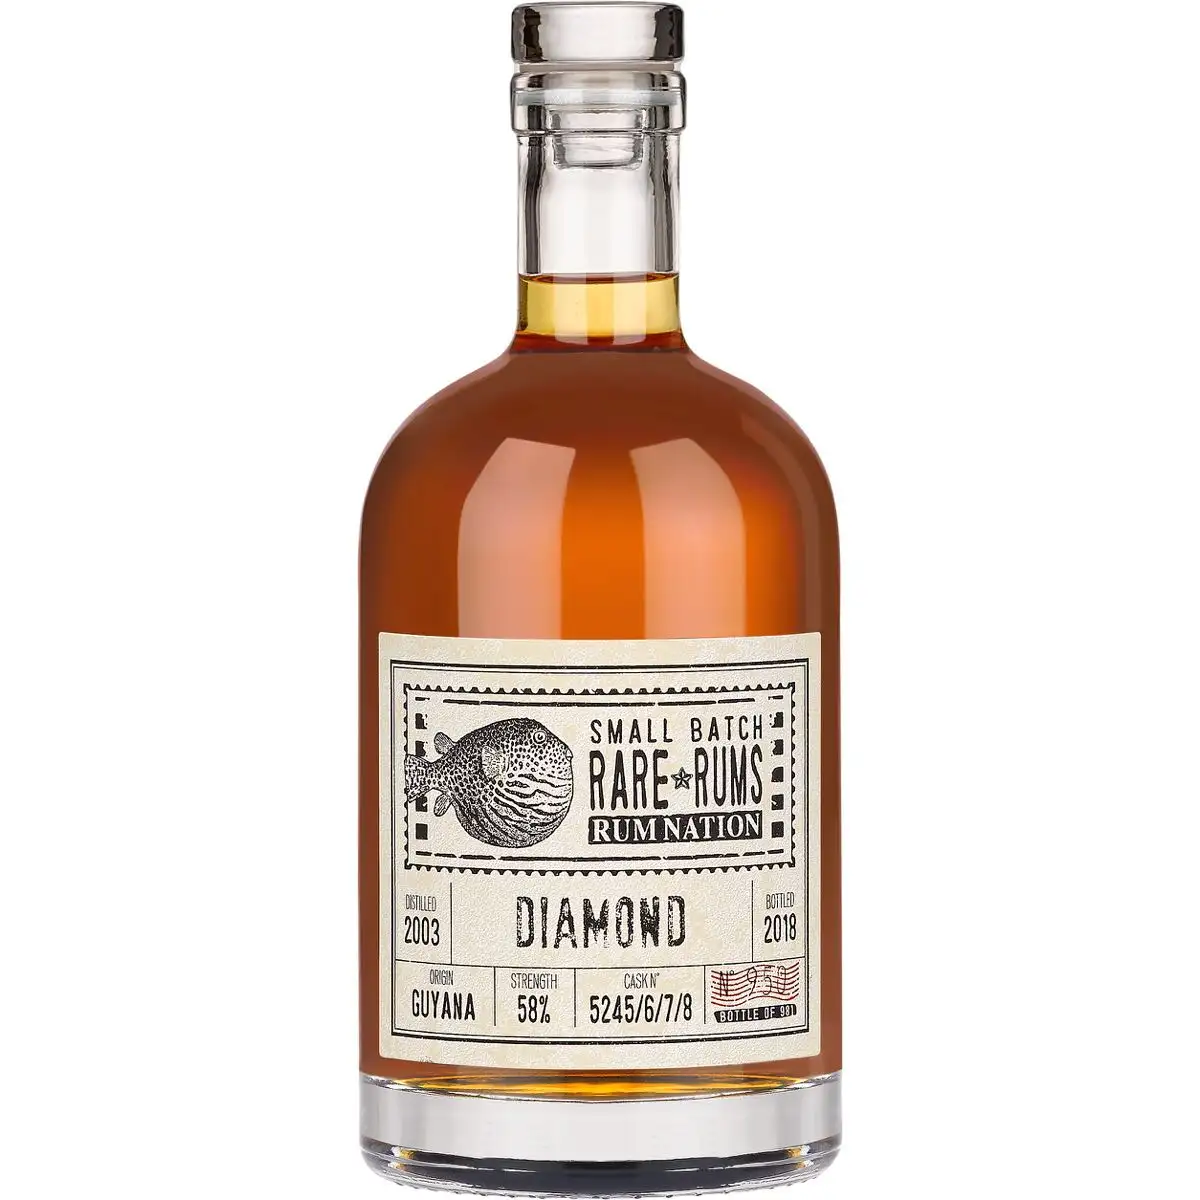 Image of the front of the bottle of the rum Small Batch Rare Rums SXG